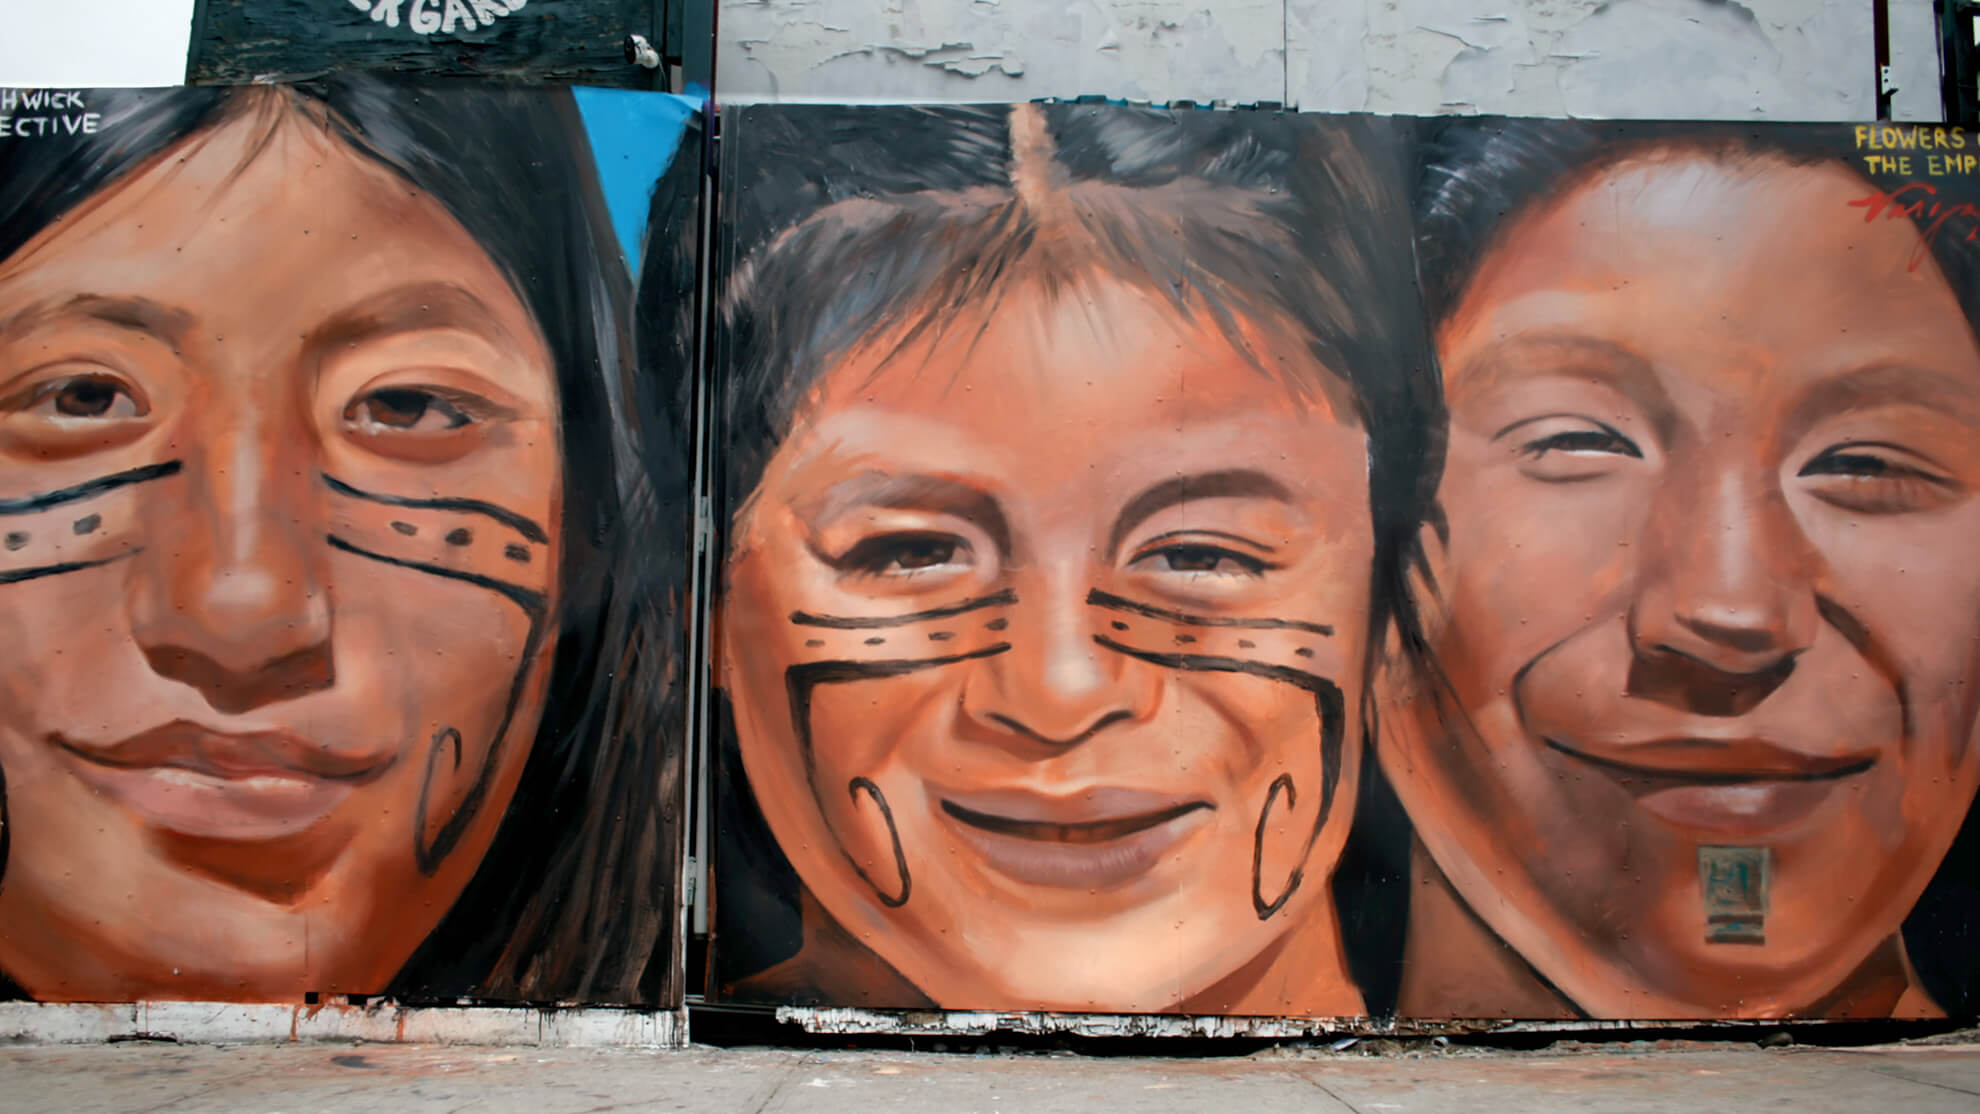 A full image showcasing the mural "Flowers of the Empire." Three Indigenous faces return the viewer’s gaze. The man on the left and the woman in the center share similar facial markings, which are three black lines drawn horizontally under the eyes and starting at the bridge of the nose. The top line is solid while the middle line is dashed; the bottom line takes a sharp turn at the cheekbones and curls down next to the mouth on both sides.